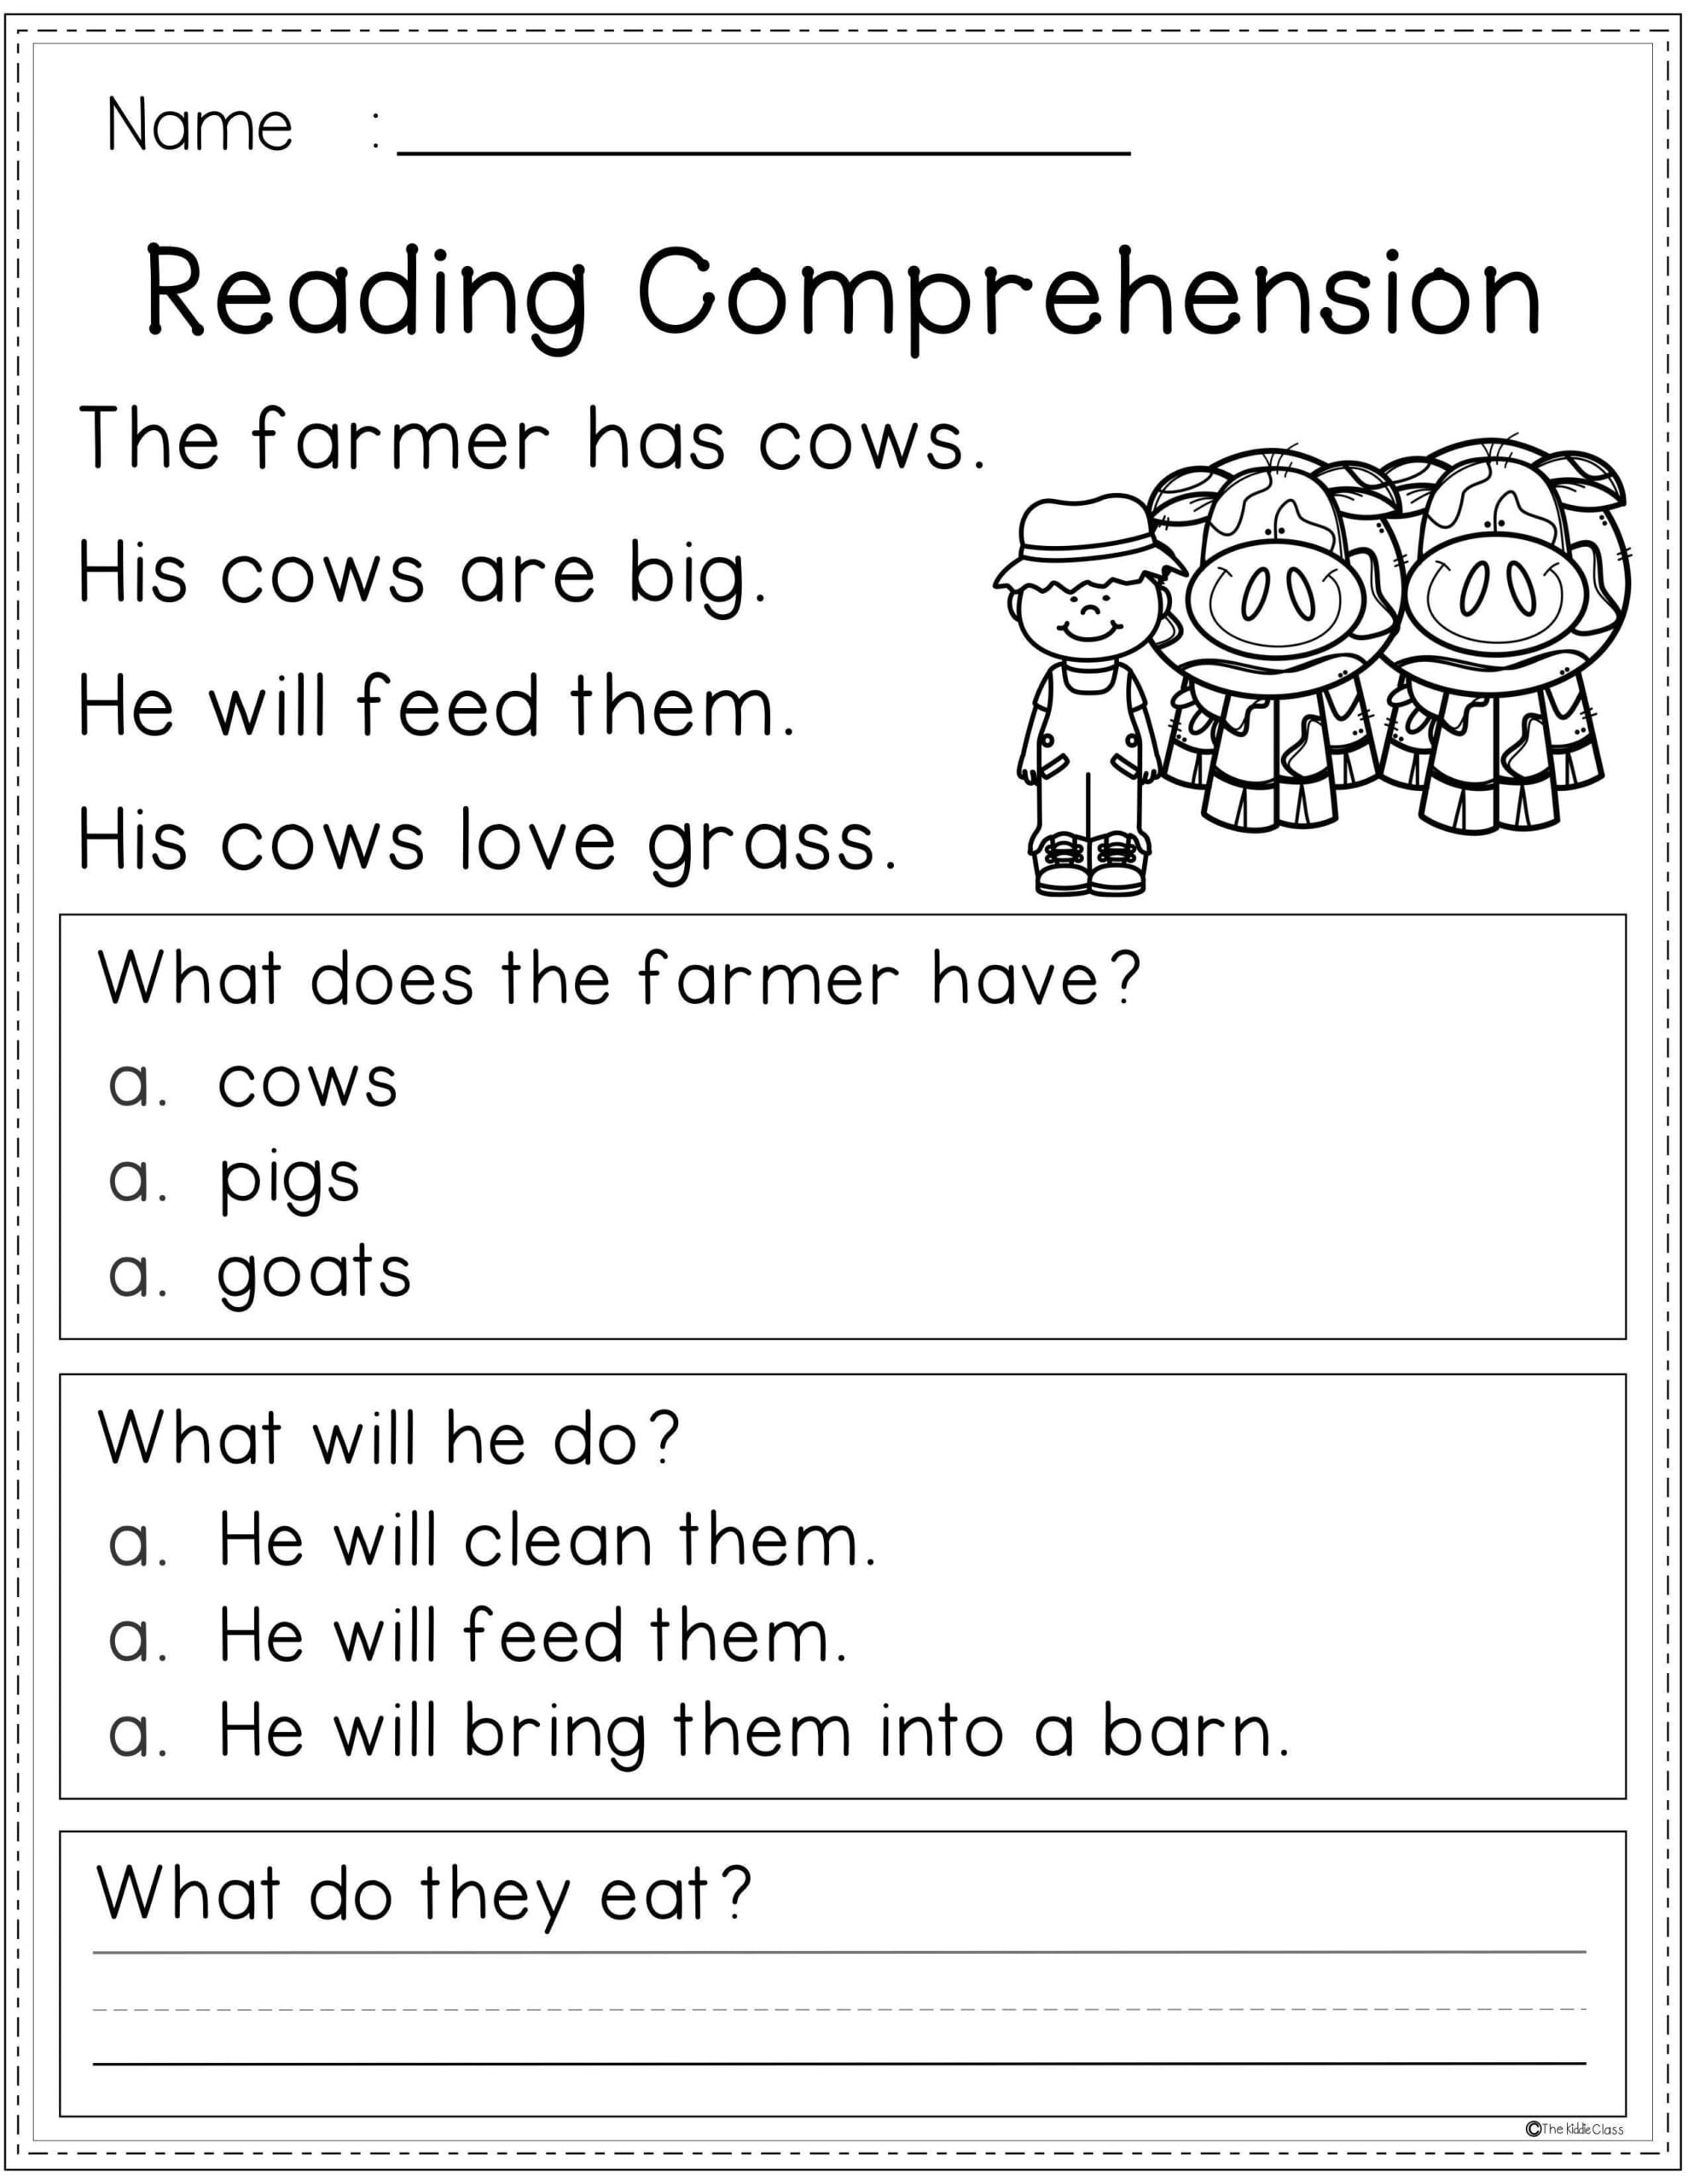 Free Reading Comprehension Reading Comprehension Reading Comprehension Wor Reading Comprehension First Grade Reading Comprehension 1st Grade Reading Worksheets